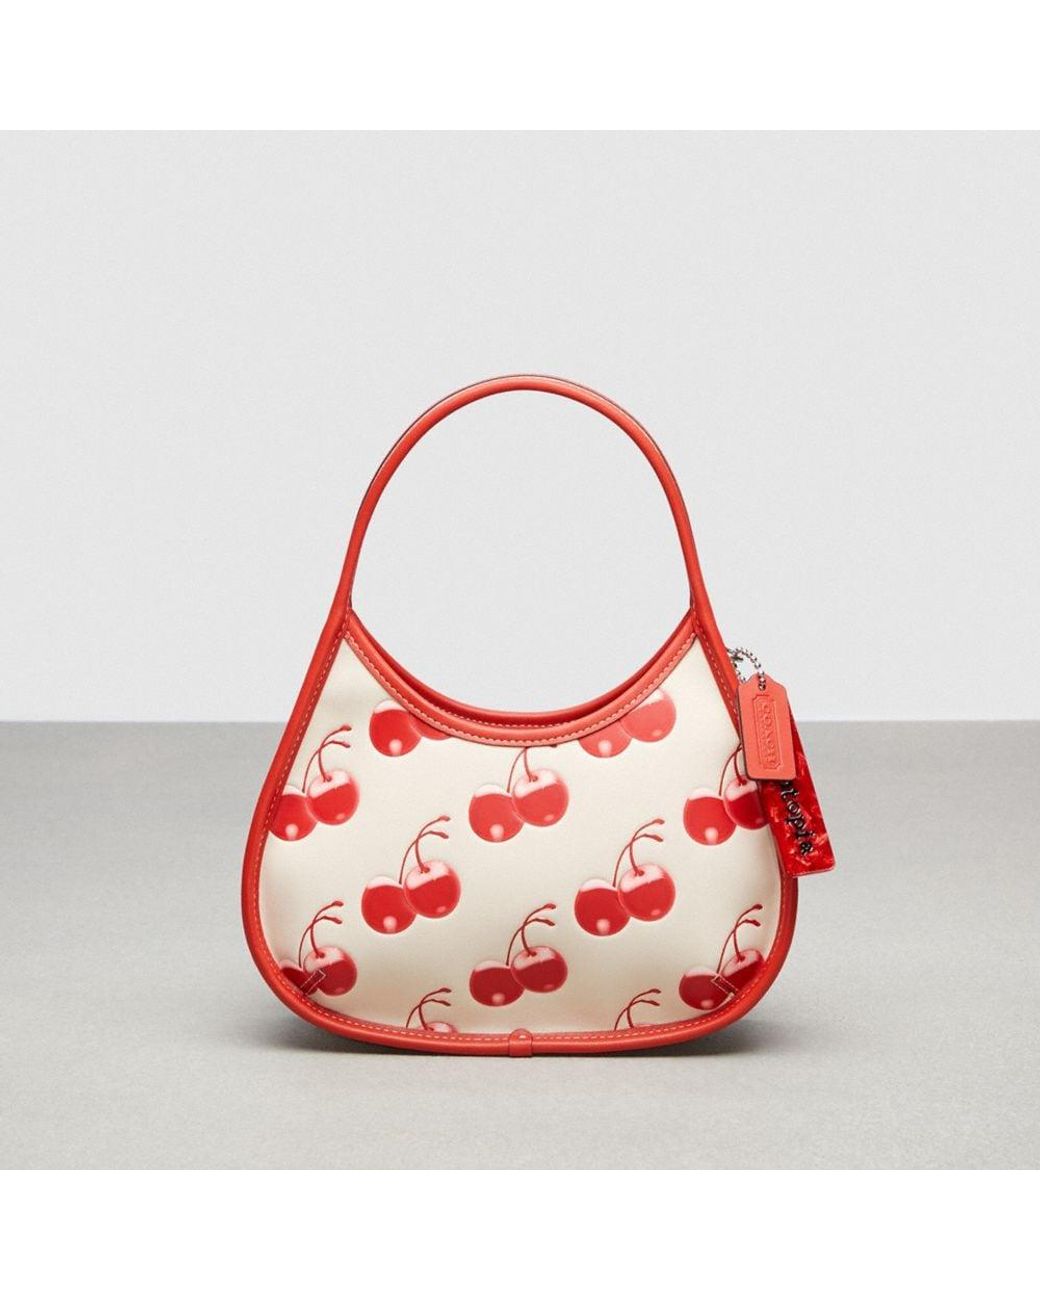 COACH Ergo Shoulder Bag In Topia Leather With Cherry Print in Red | Lyst